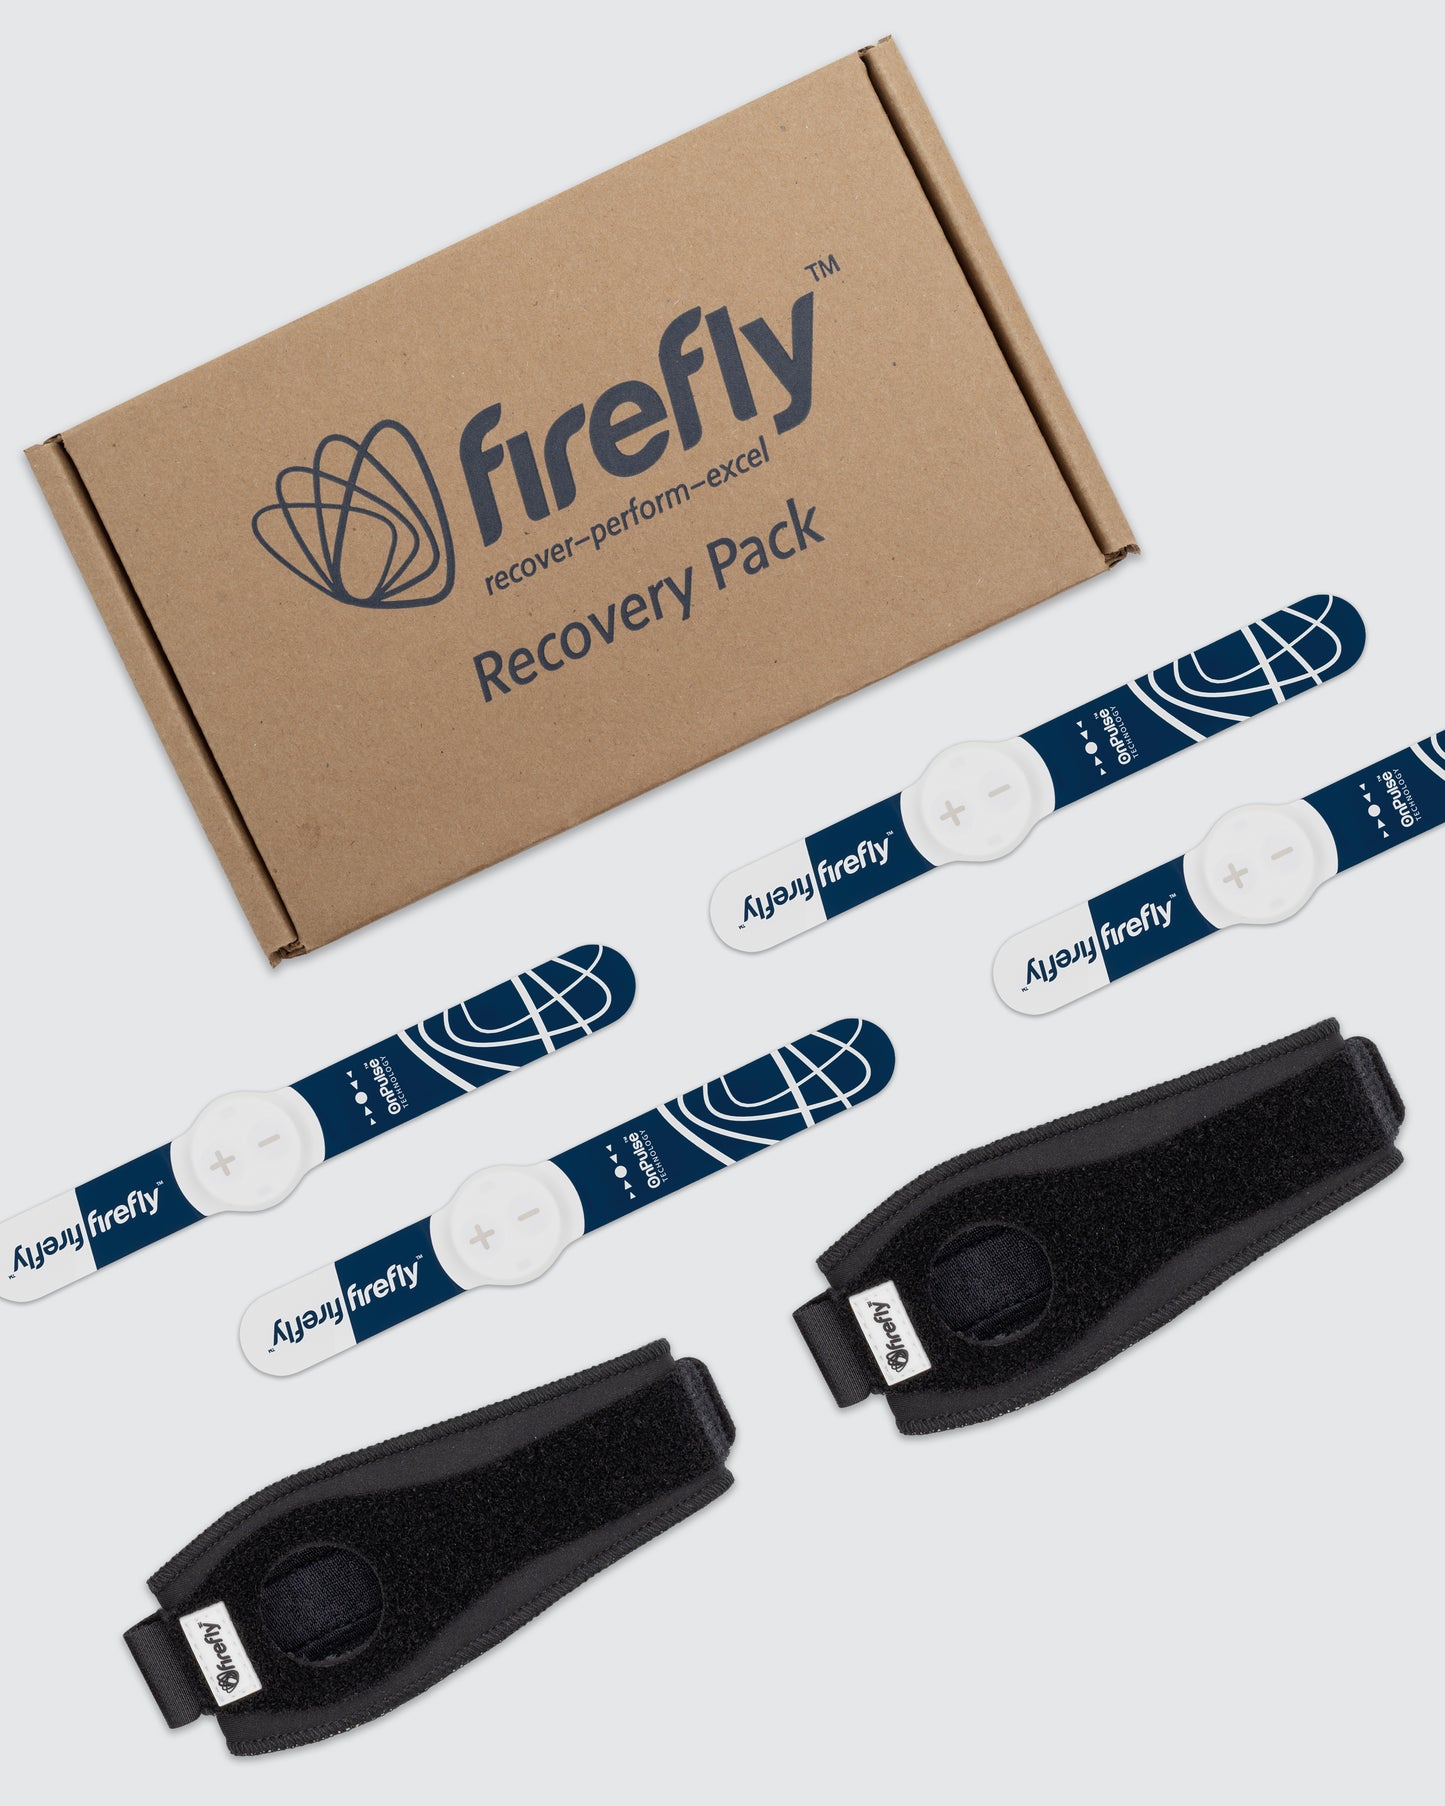 Firefly Portable Recovery Device